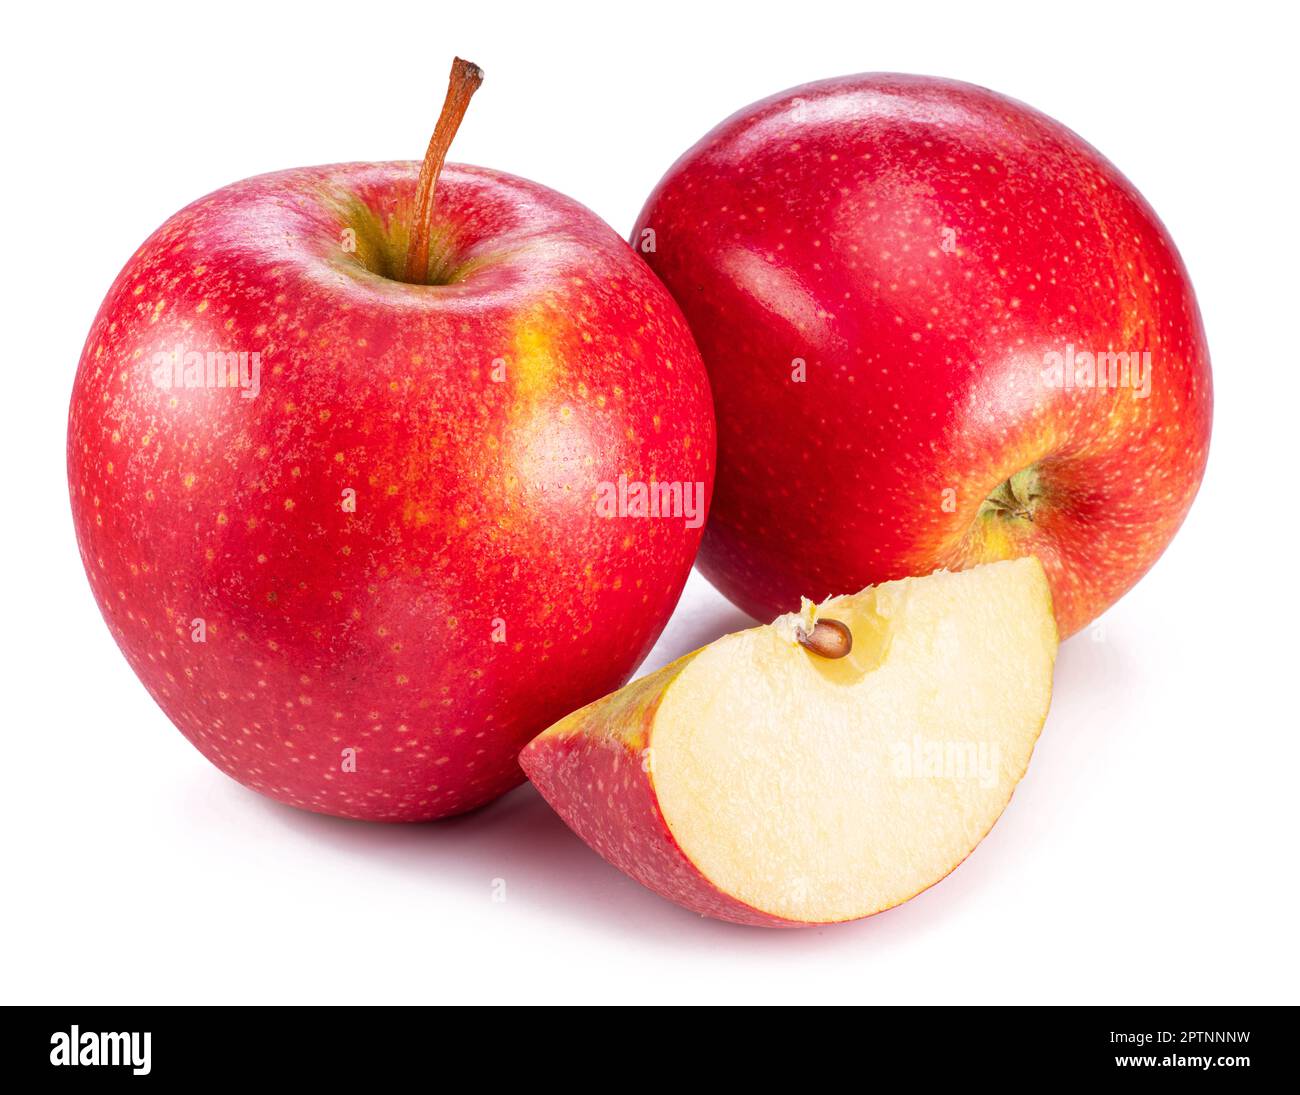 https://c8.alamy.com/comp/2PTNNNW/ripe-red-apples-and-apple-slice-isolated-on-white-background-2PTNNNW.jpg